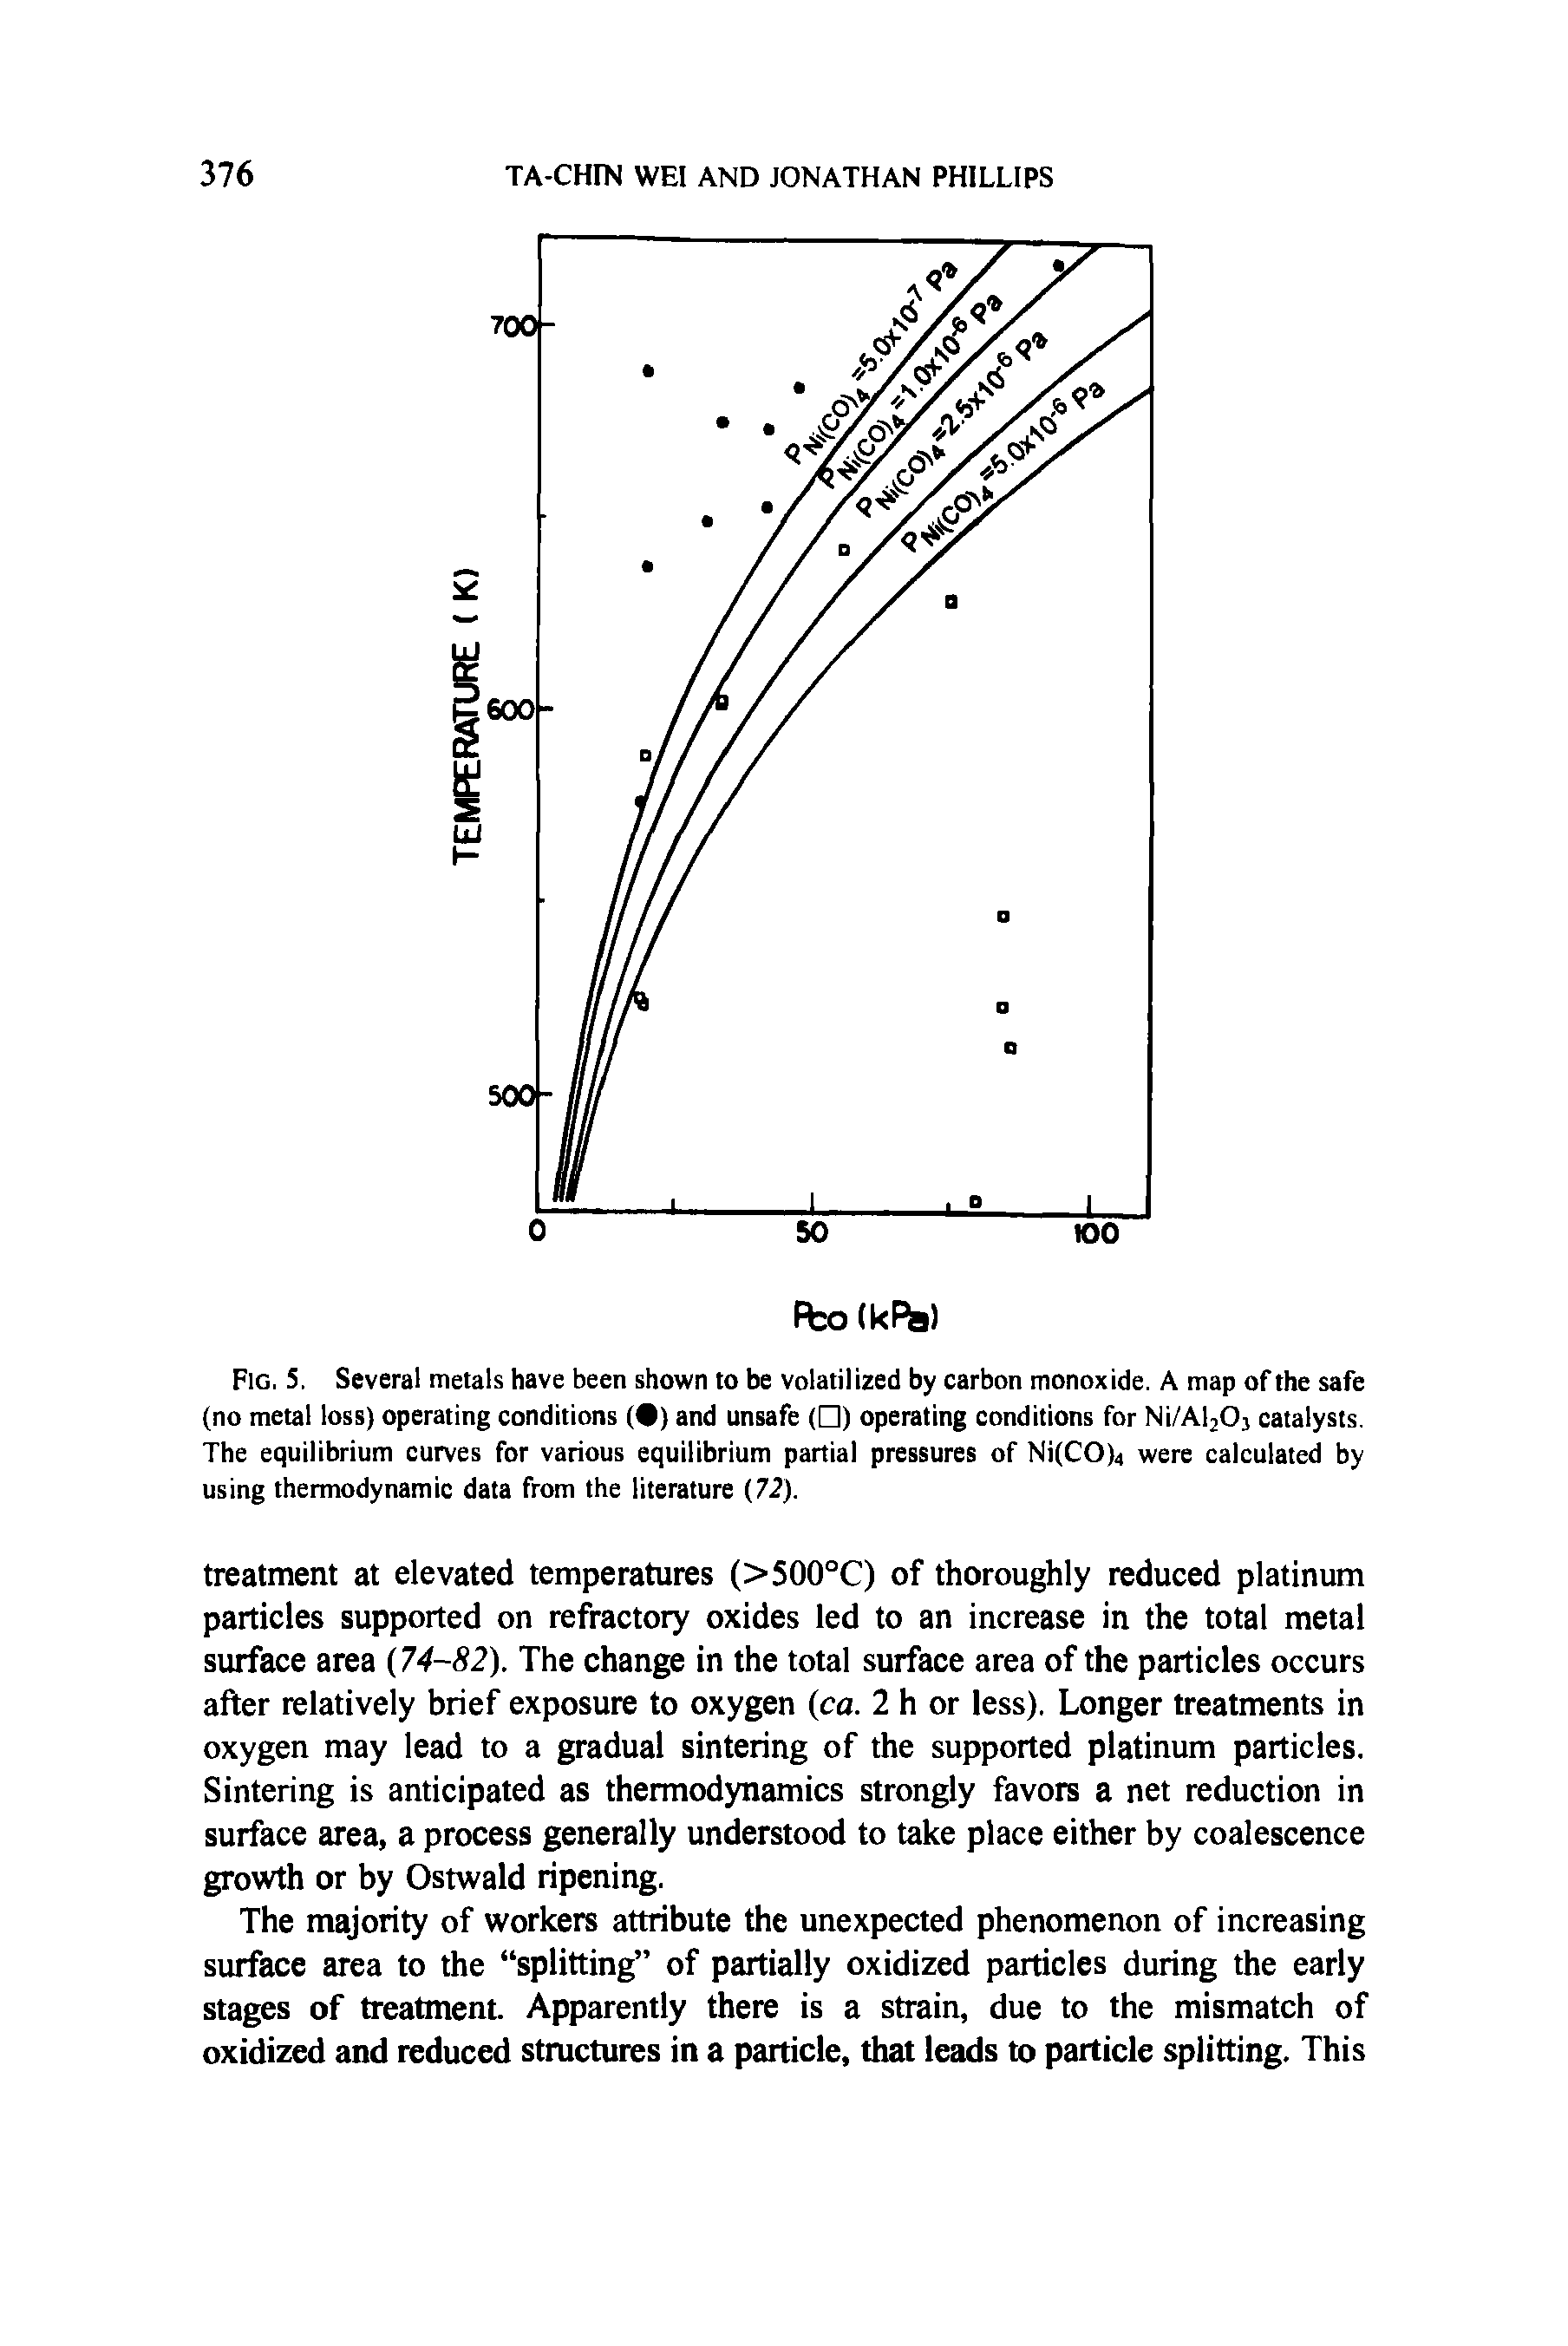 Fig. 5. Several metals have been shown to be volatilized by carbon monoxide. A map of the safe (no metal loss) operating conditions ( ) and unsafe ( ) operating conditions for Ni/Al2Oj catalysts. The equilibrium curves for various equilibrium partial pressures of Ni(CO)4 were calculated by using thermodynamic data from the literature (72).